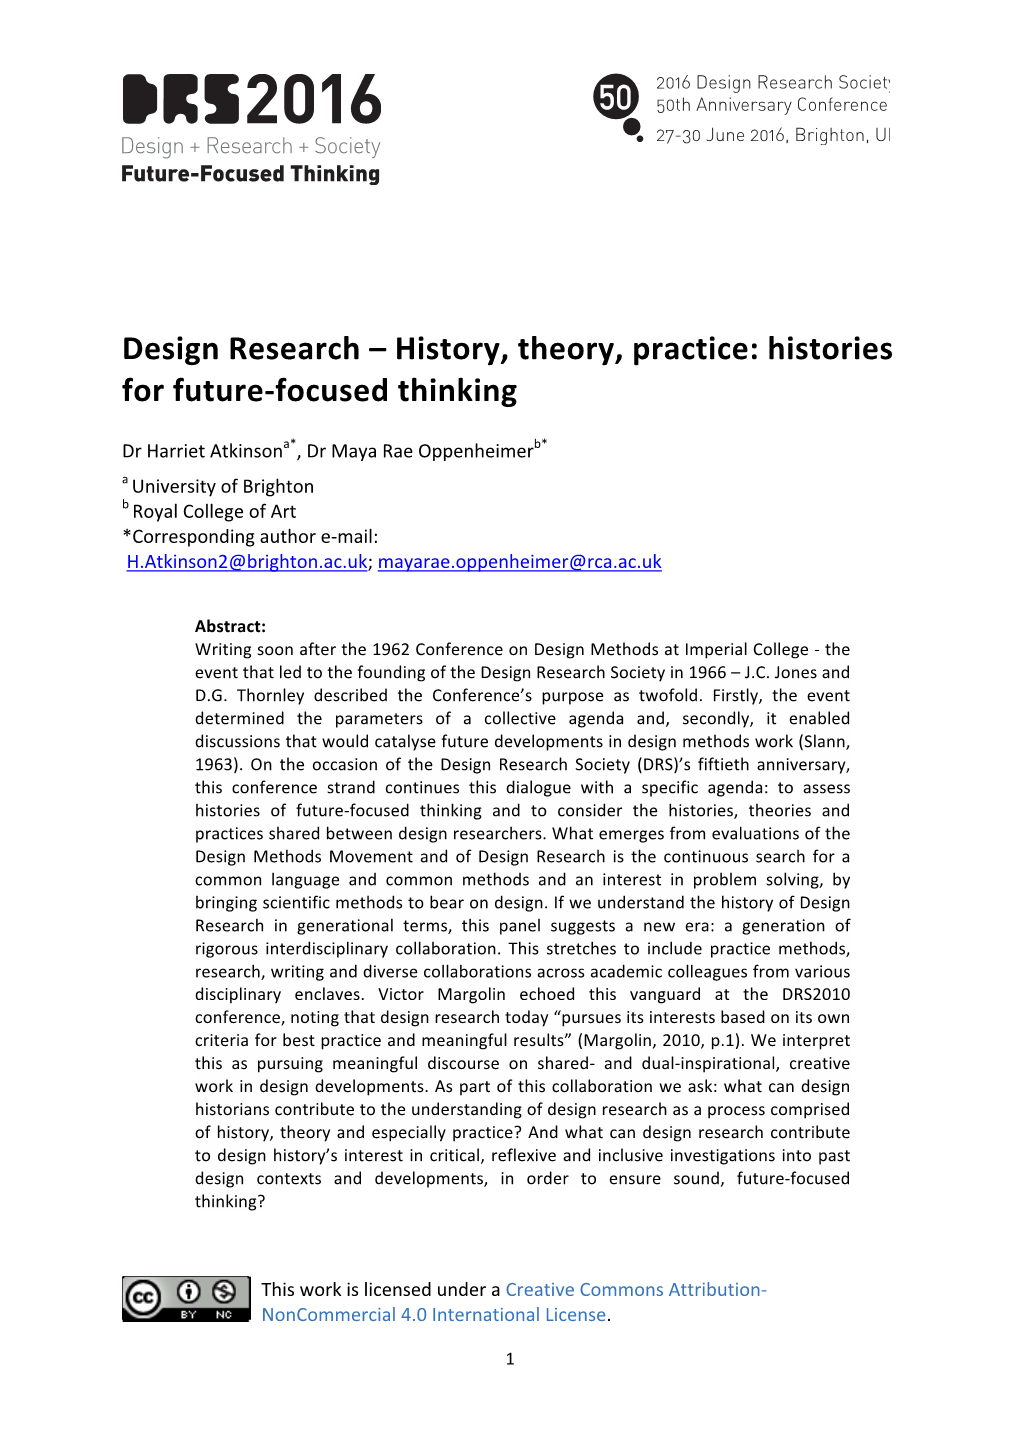 Design Research – History, Theory, Practice: Histories for Future-Focused Thinking